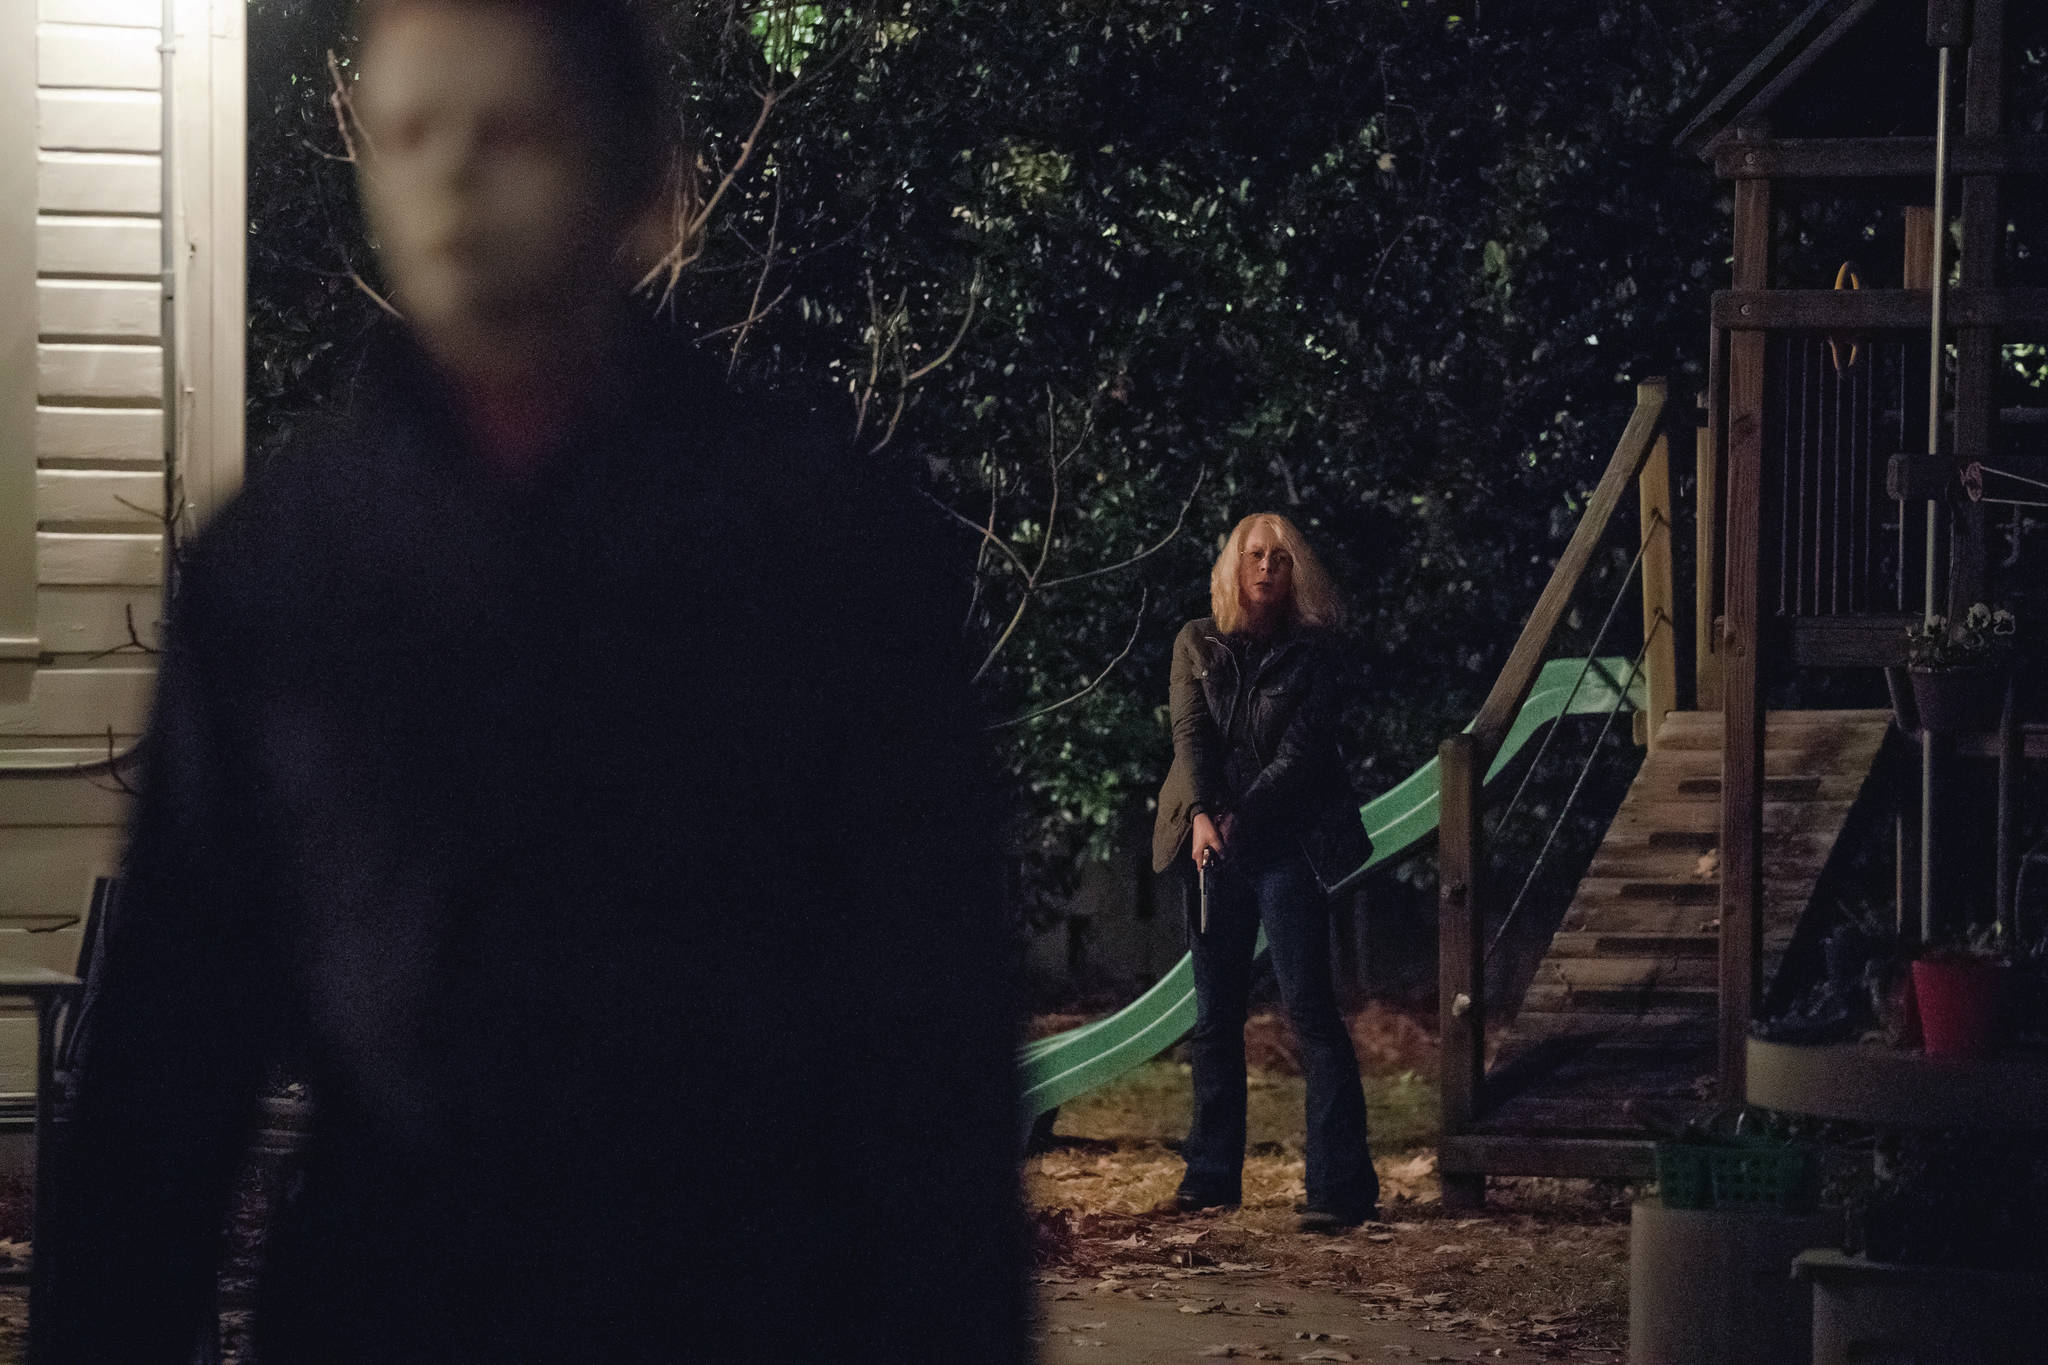 Laurie Strode (Jamie Lee Curtis) returns to once again square off with Michael Myers in the new ‘Halloween.’ Photo by Ryan Green/Universal Studios